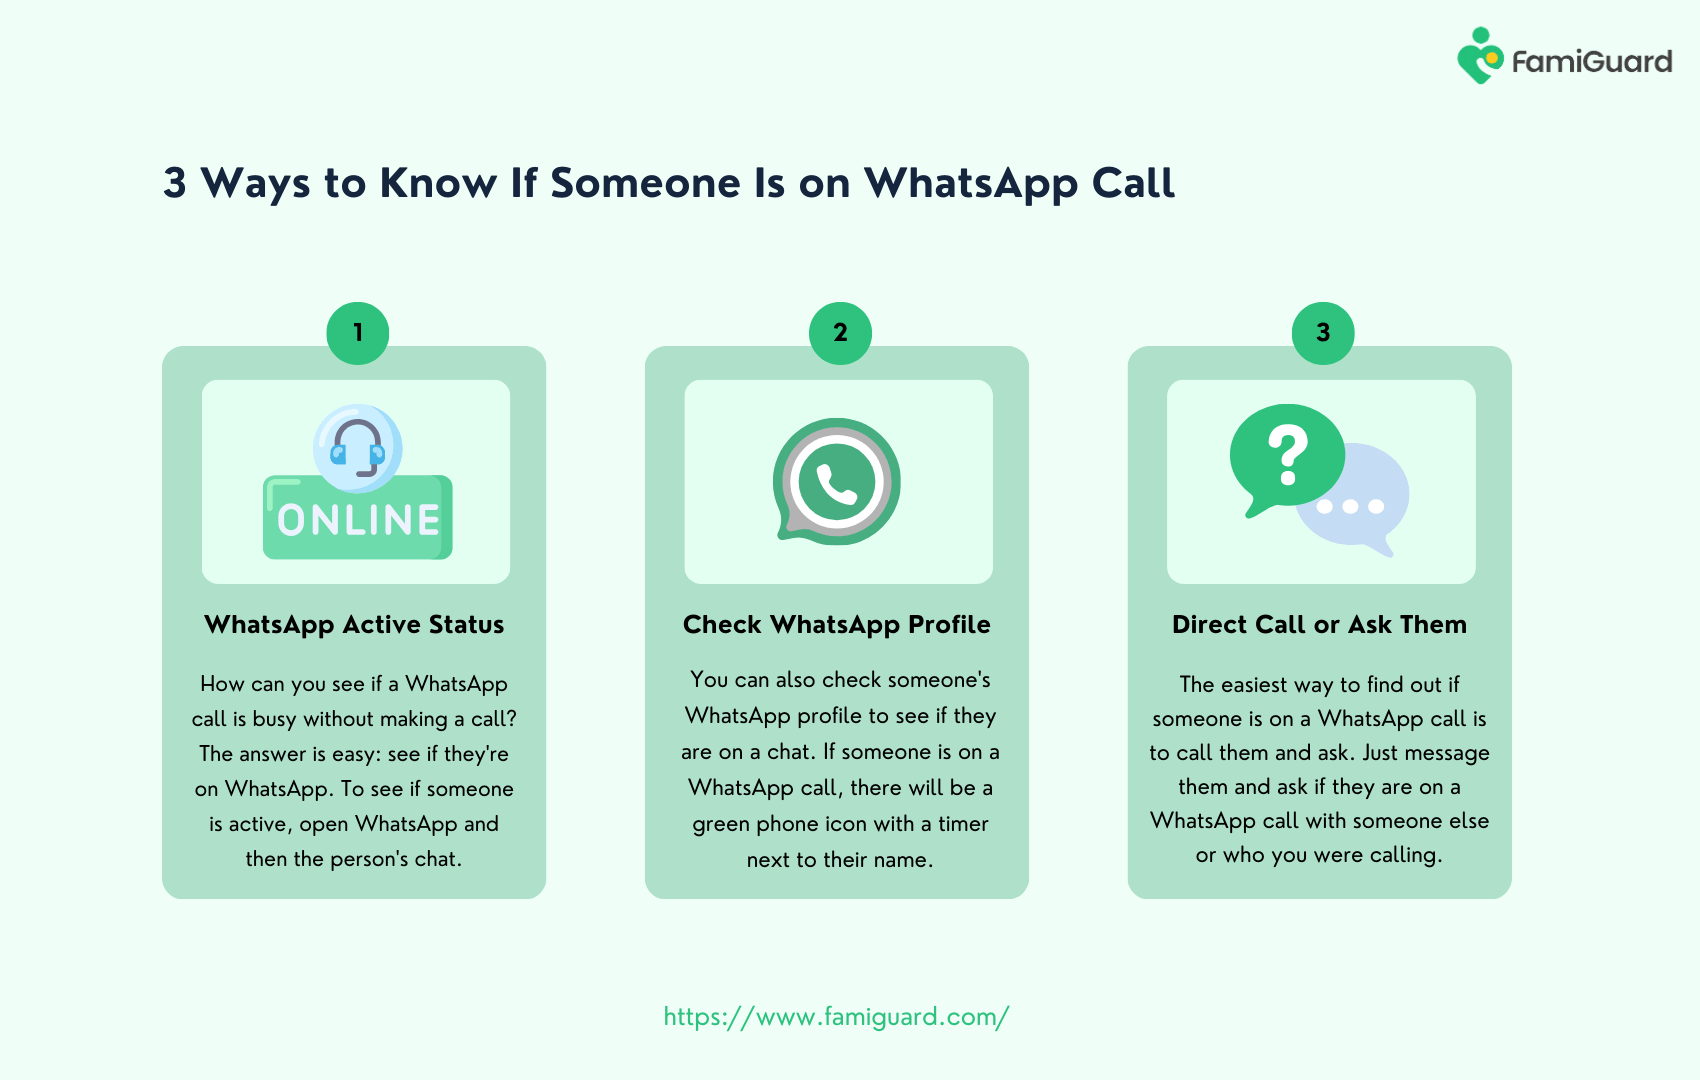 3 Ways to Know If Someone Is on WhatsApp Call